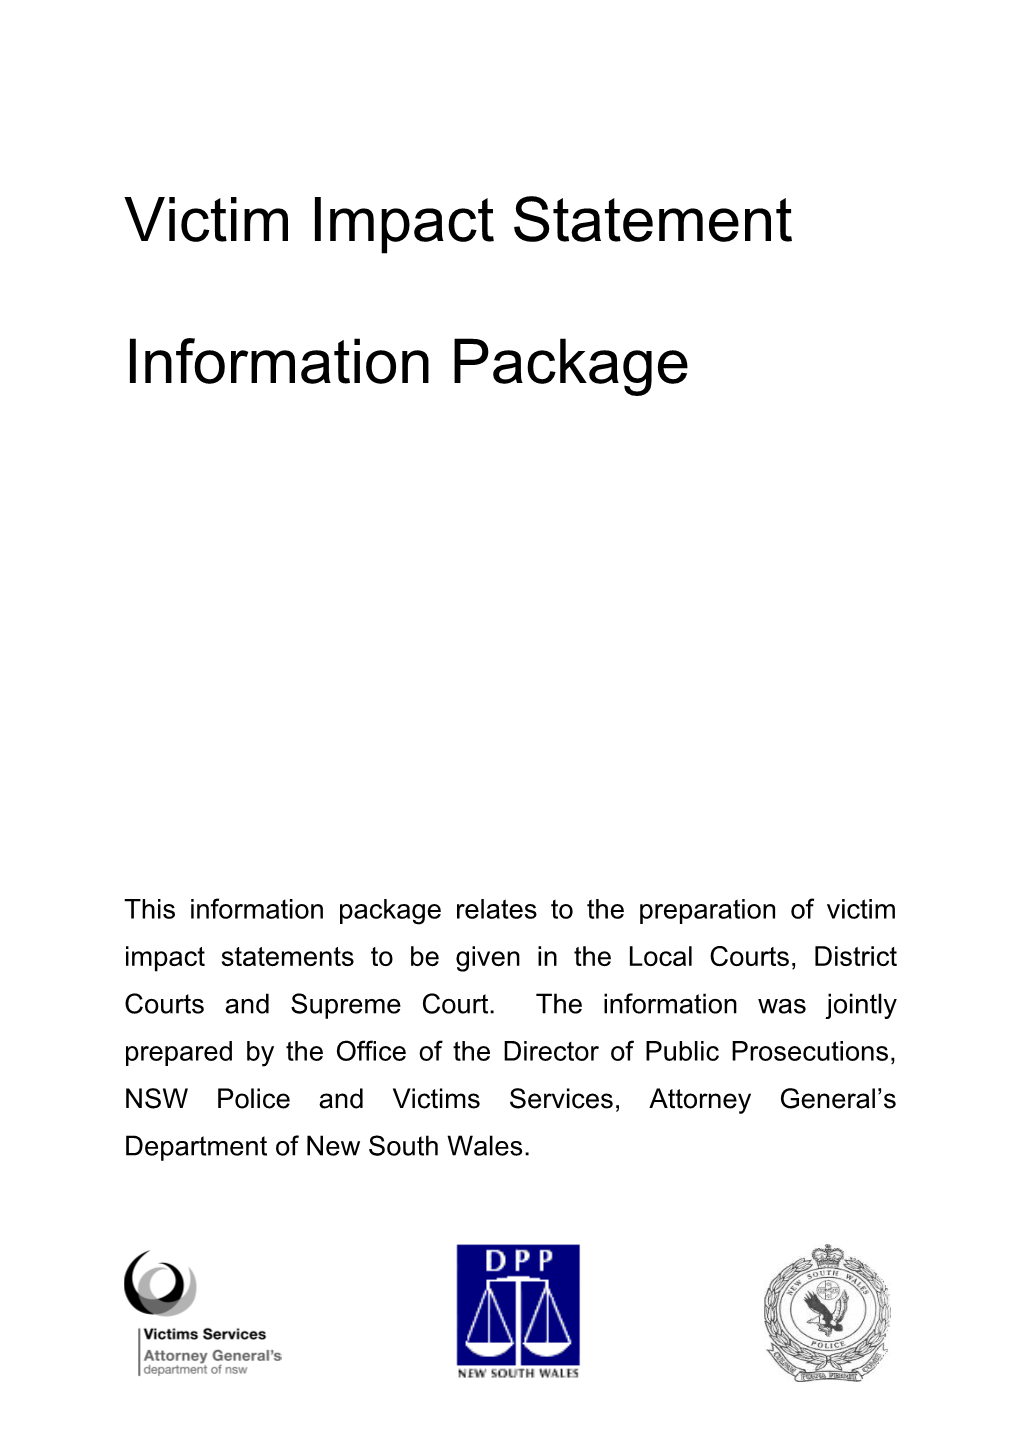 What Is a Victim Impact Statement